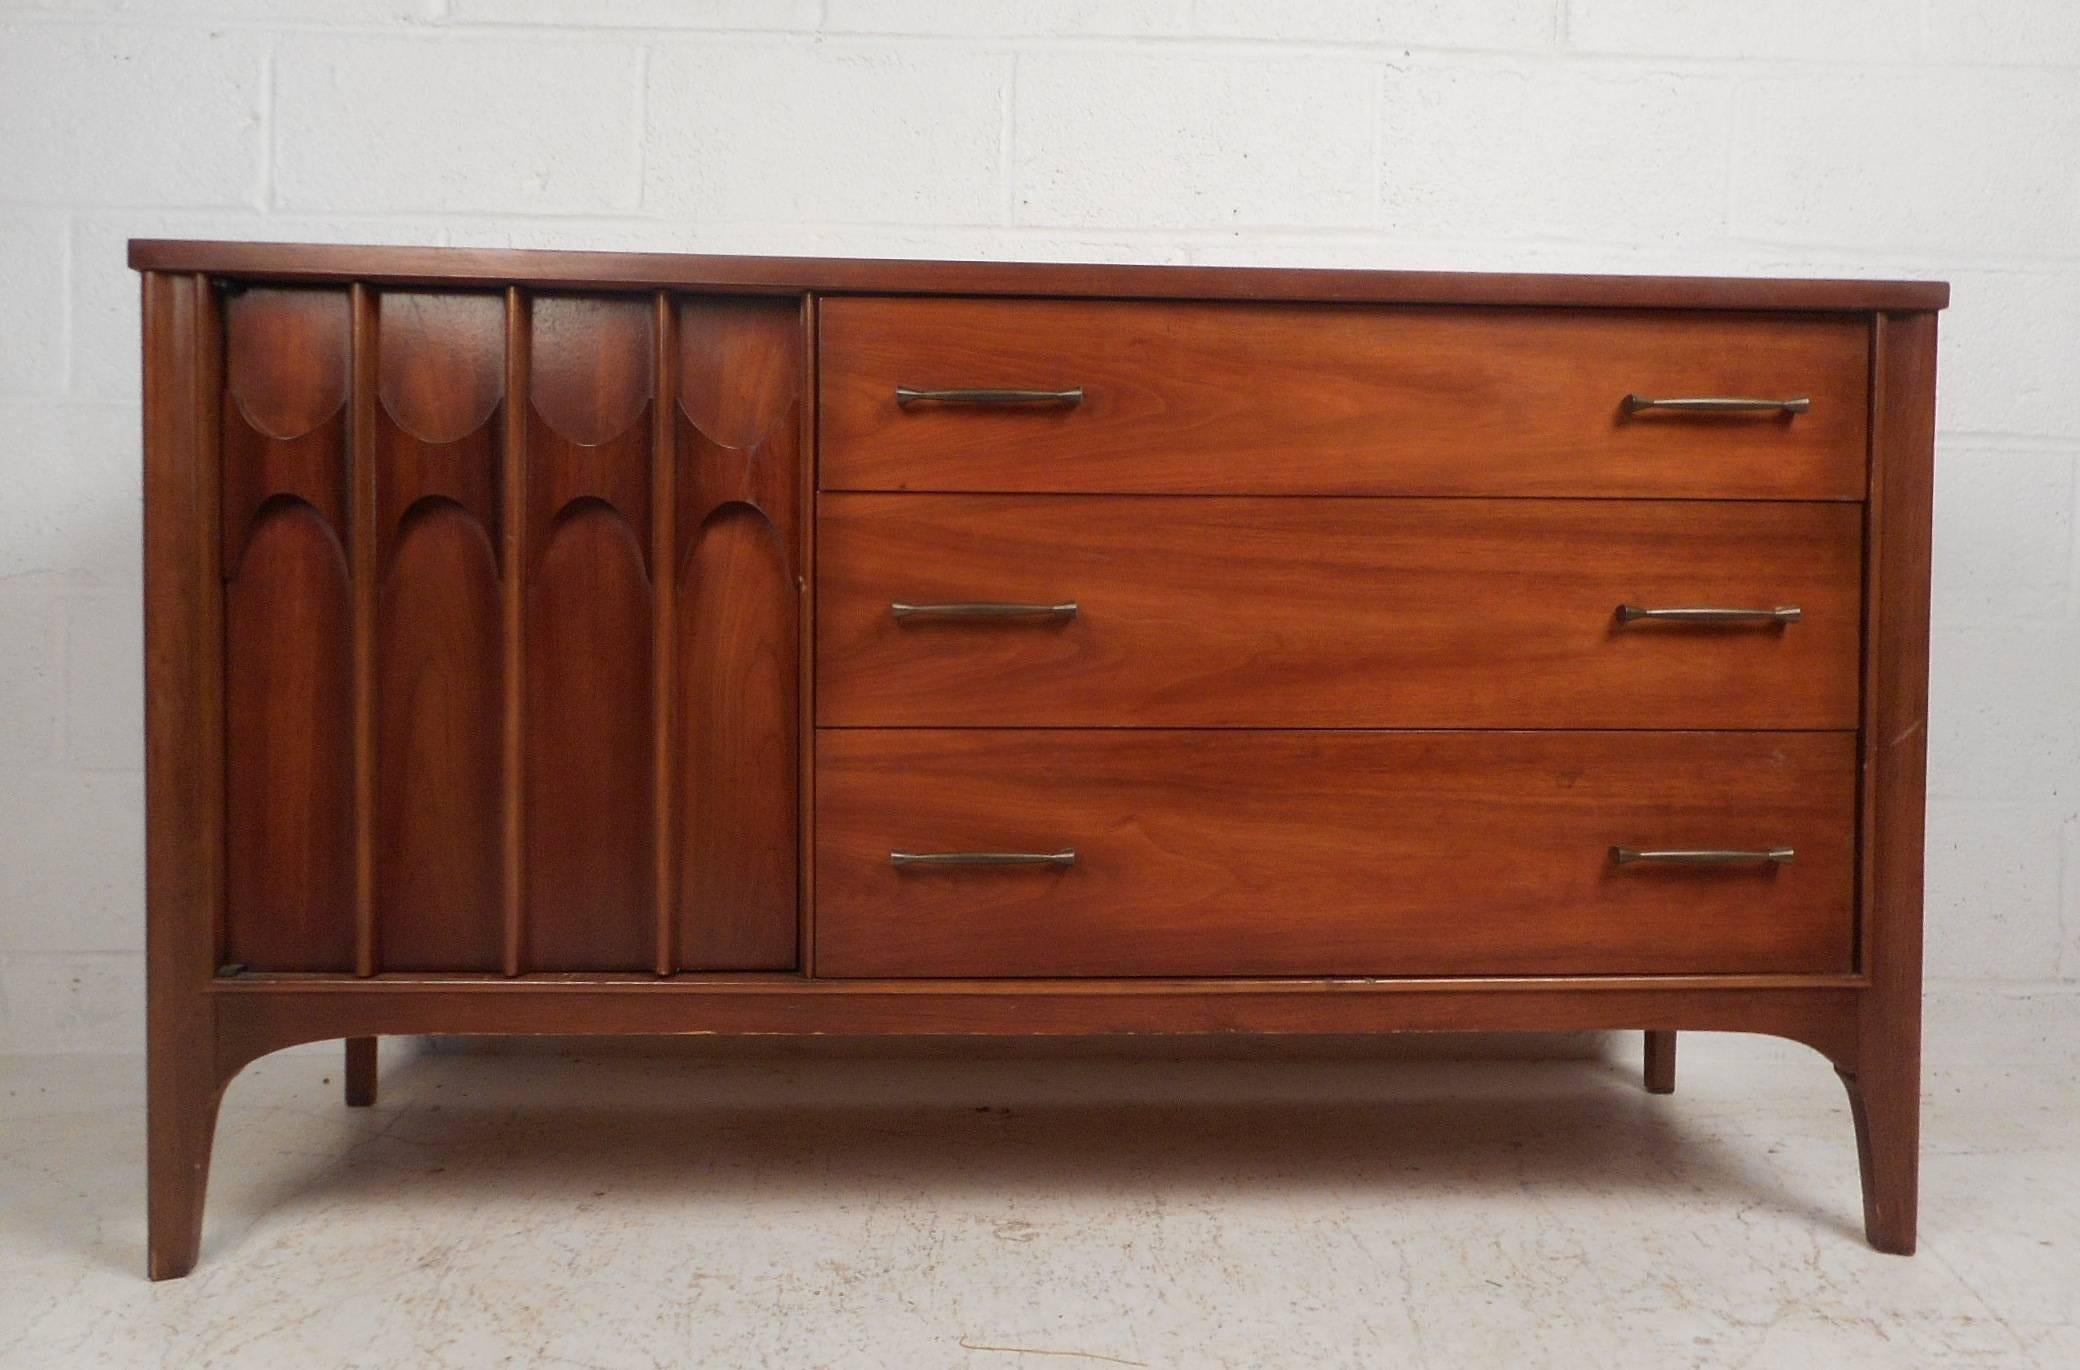 This beautiful vintage modern sideboard features three hefty drawers and a large storage compartment with a shelf. A vintage walnut finish, unique metal drawer pulls, and sculpted cabinet handles add to the allure. Quality craftsmanship with a